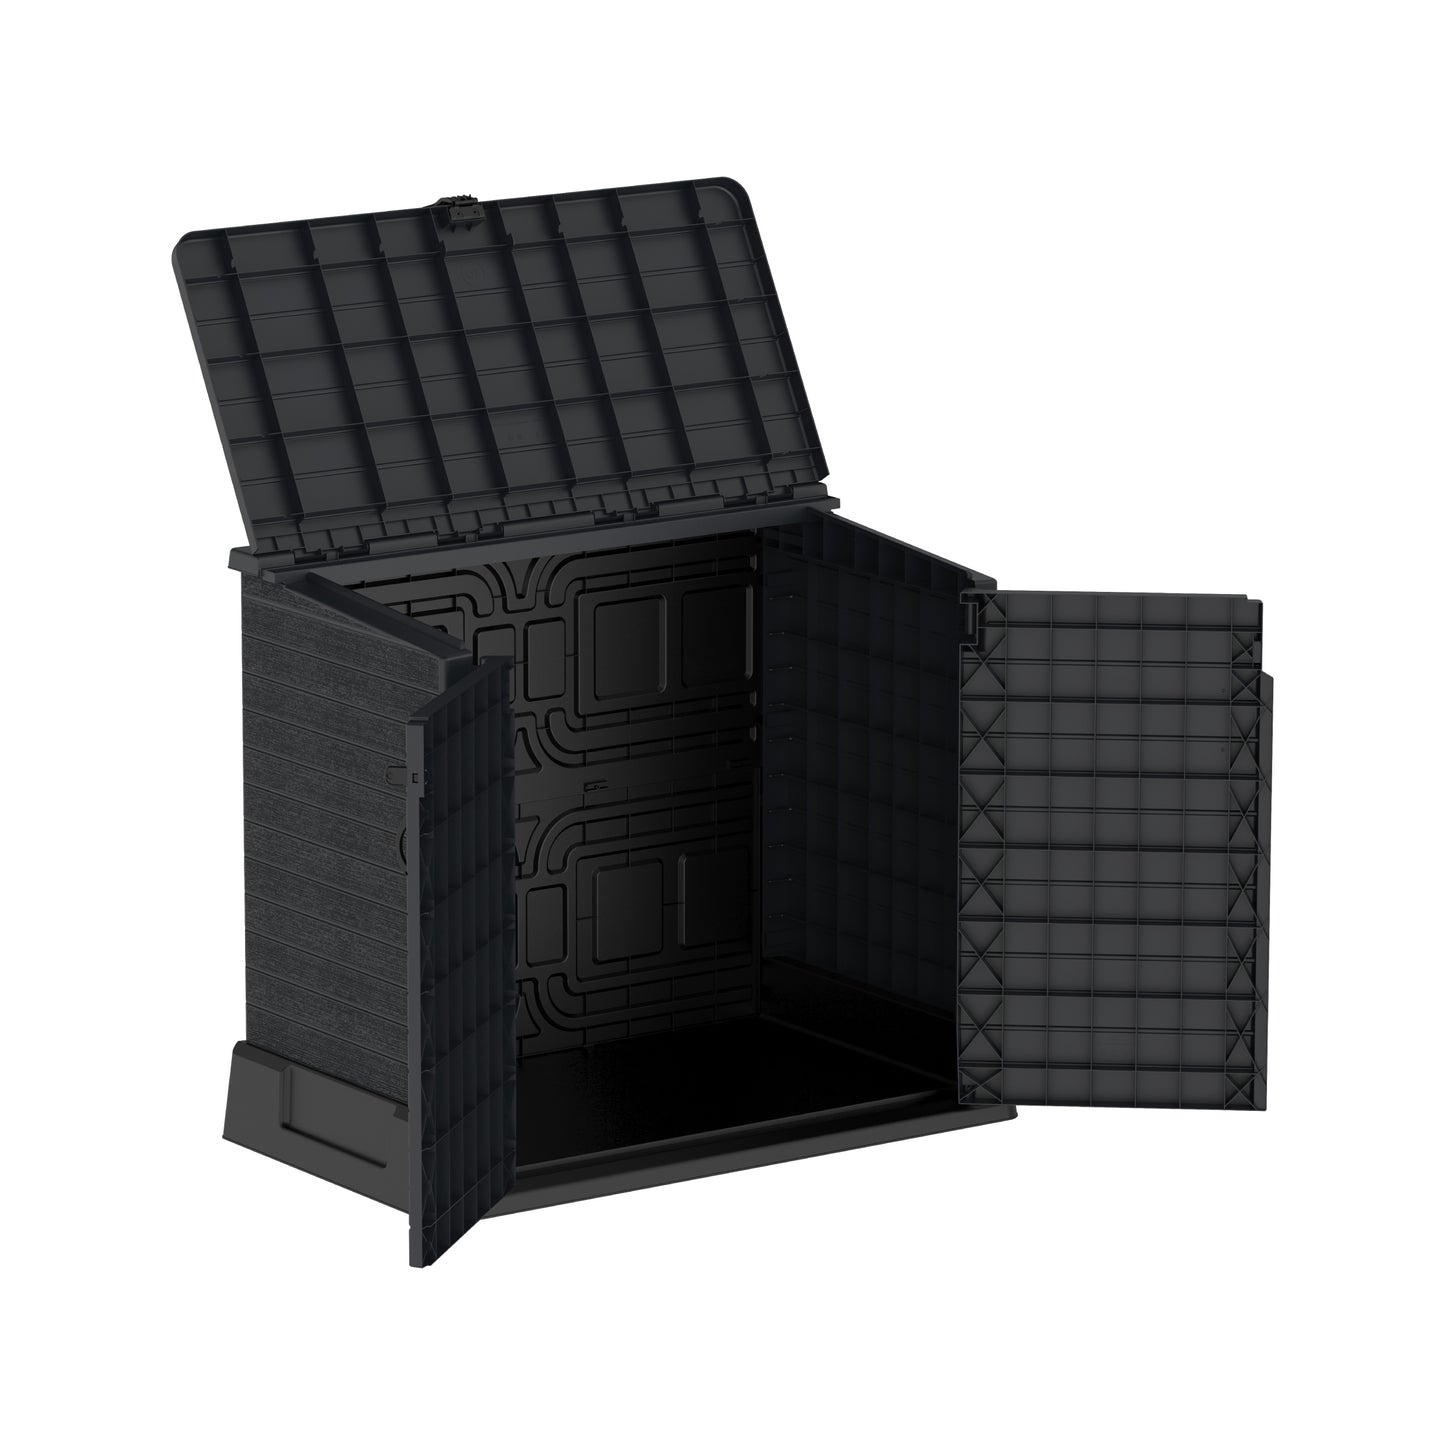 Dark grey plastic garden shed for patio, ideal for storing any tools and equipment with wide openings on front and top of the shed.